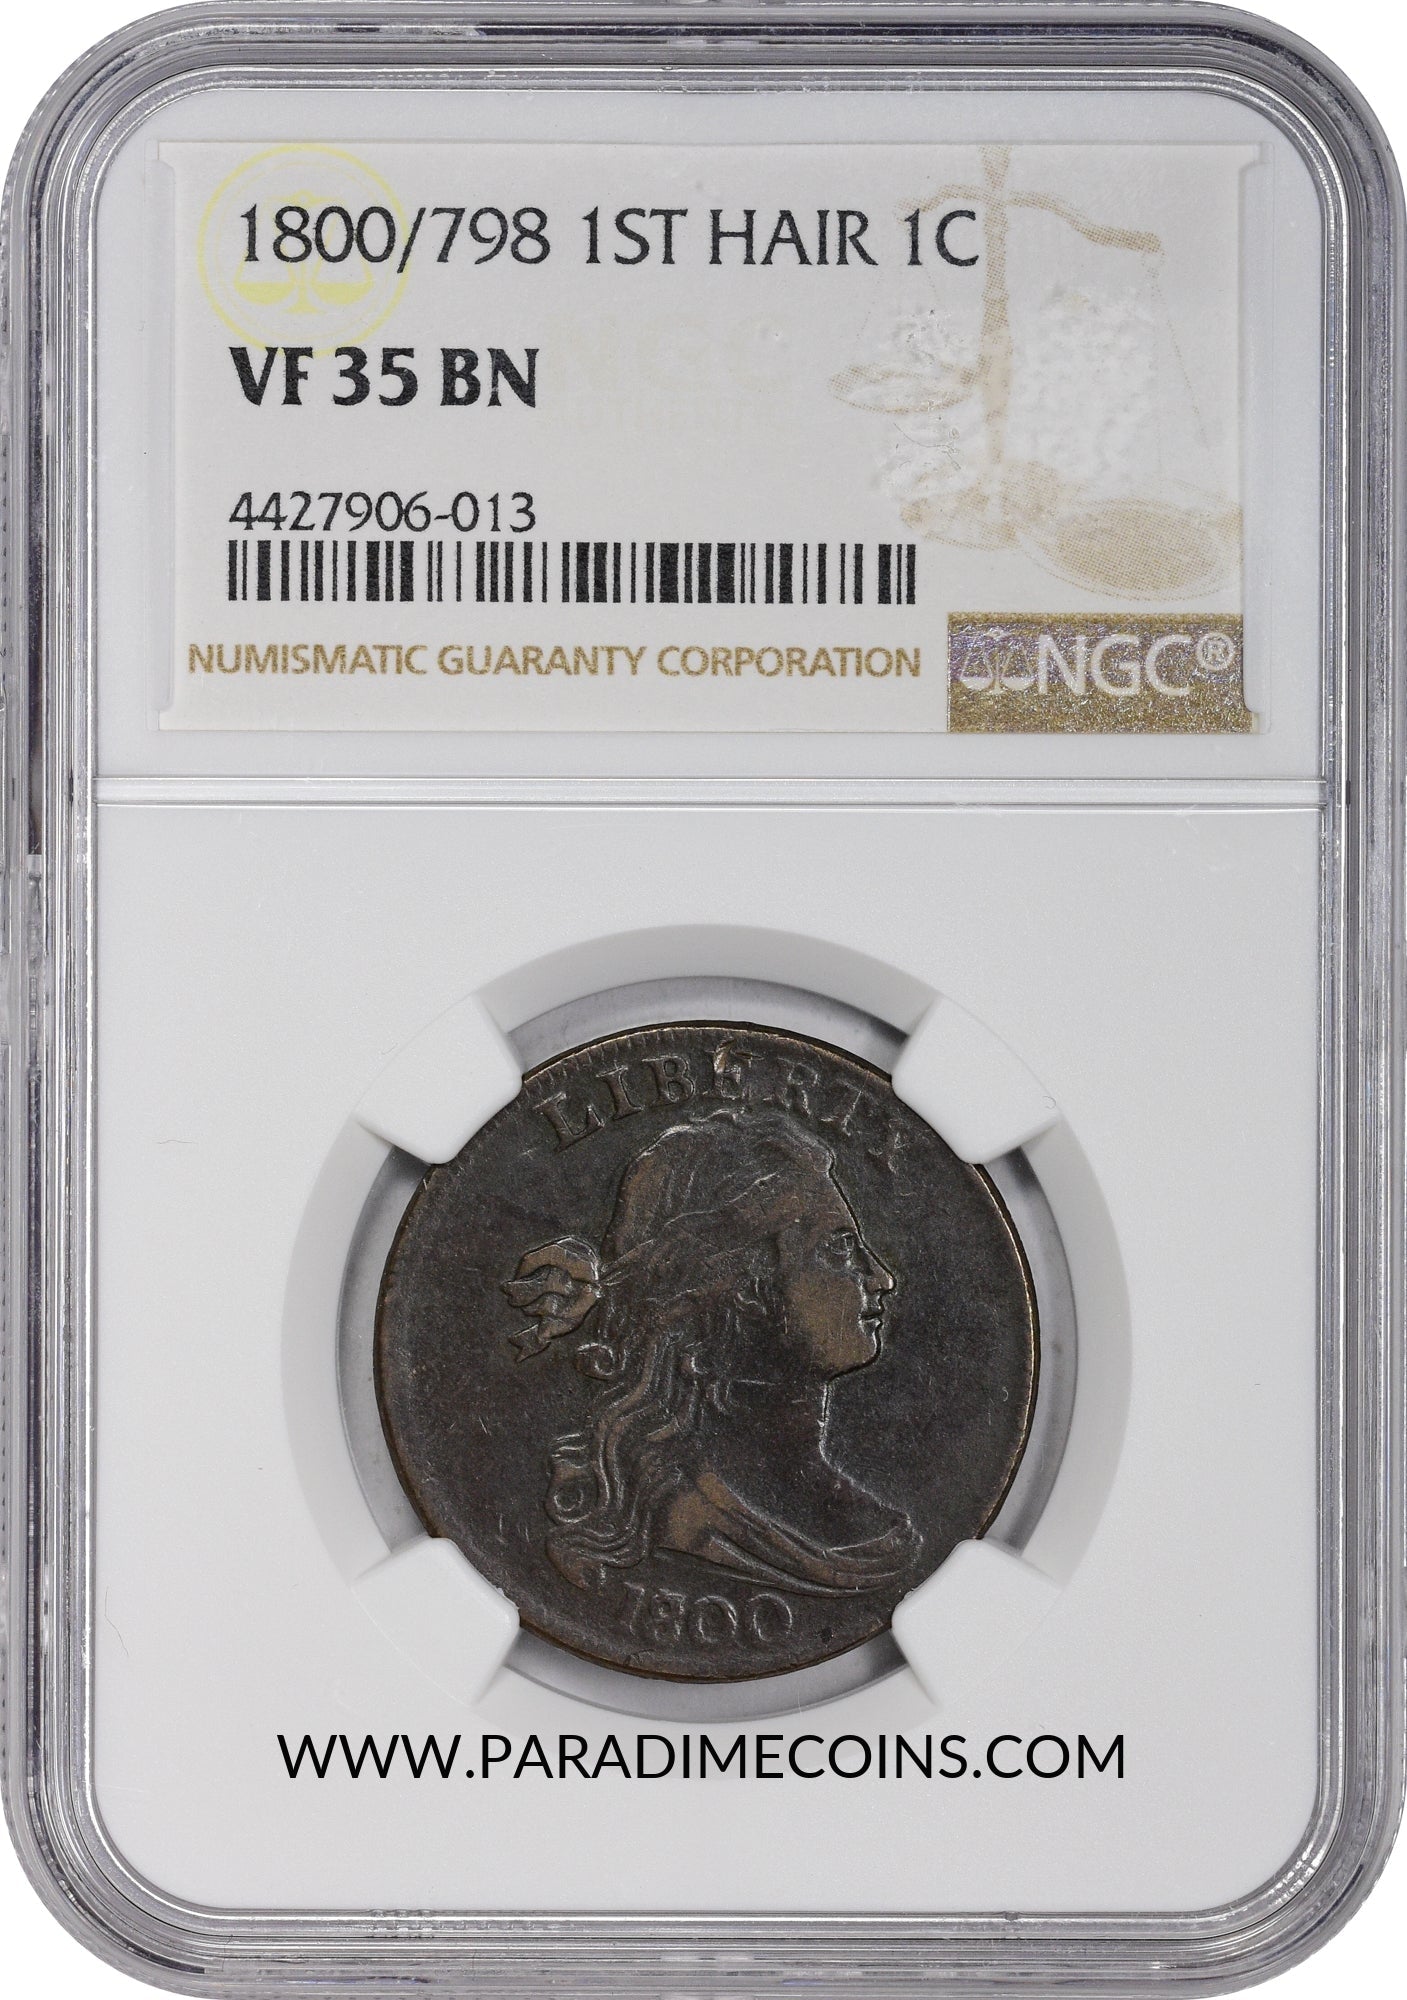 1800/798 1ST HAIR 1C VF35 NGC - Paradime Coins | PCGS NGC CACG CAC Rare US Numismatic Coins For Sale